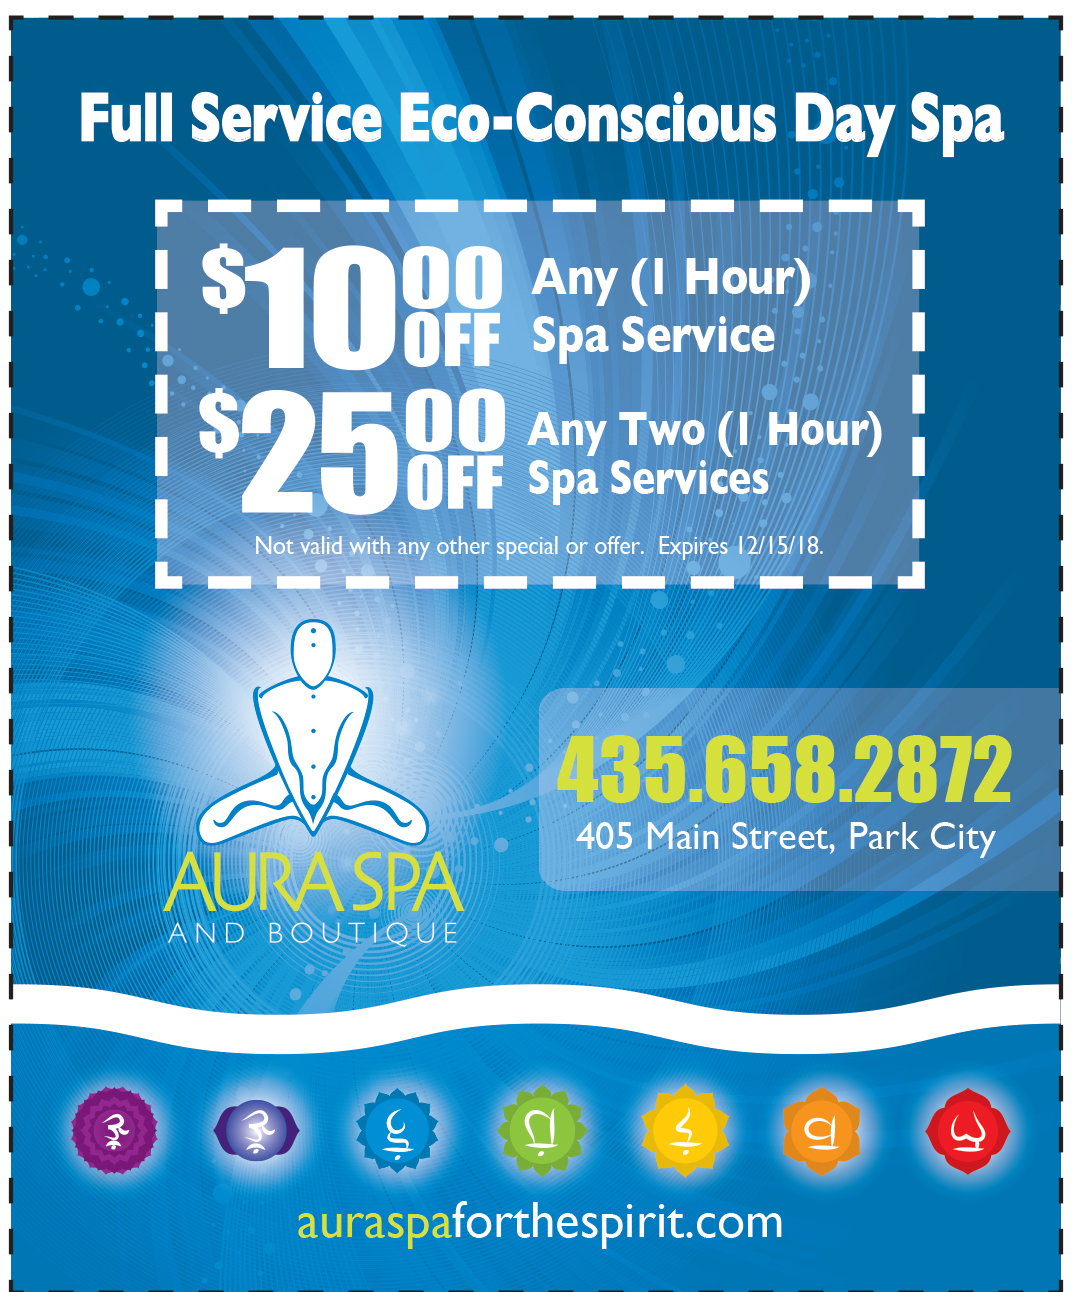 25 OFF Any Two 1 Hour Spa Services Aura Spa Park City’s Best Deals